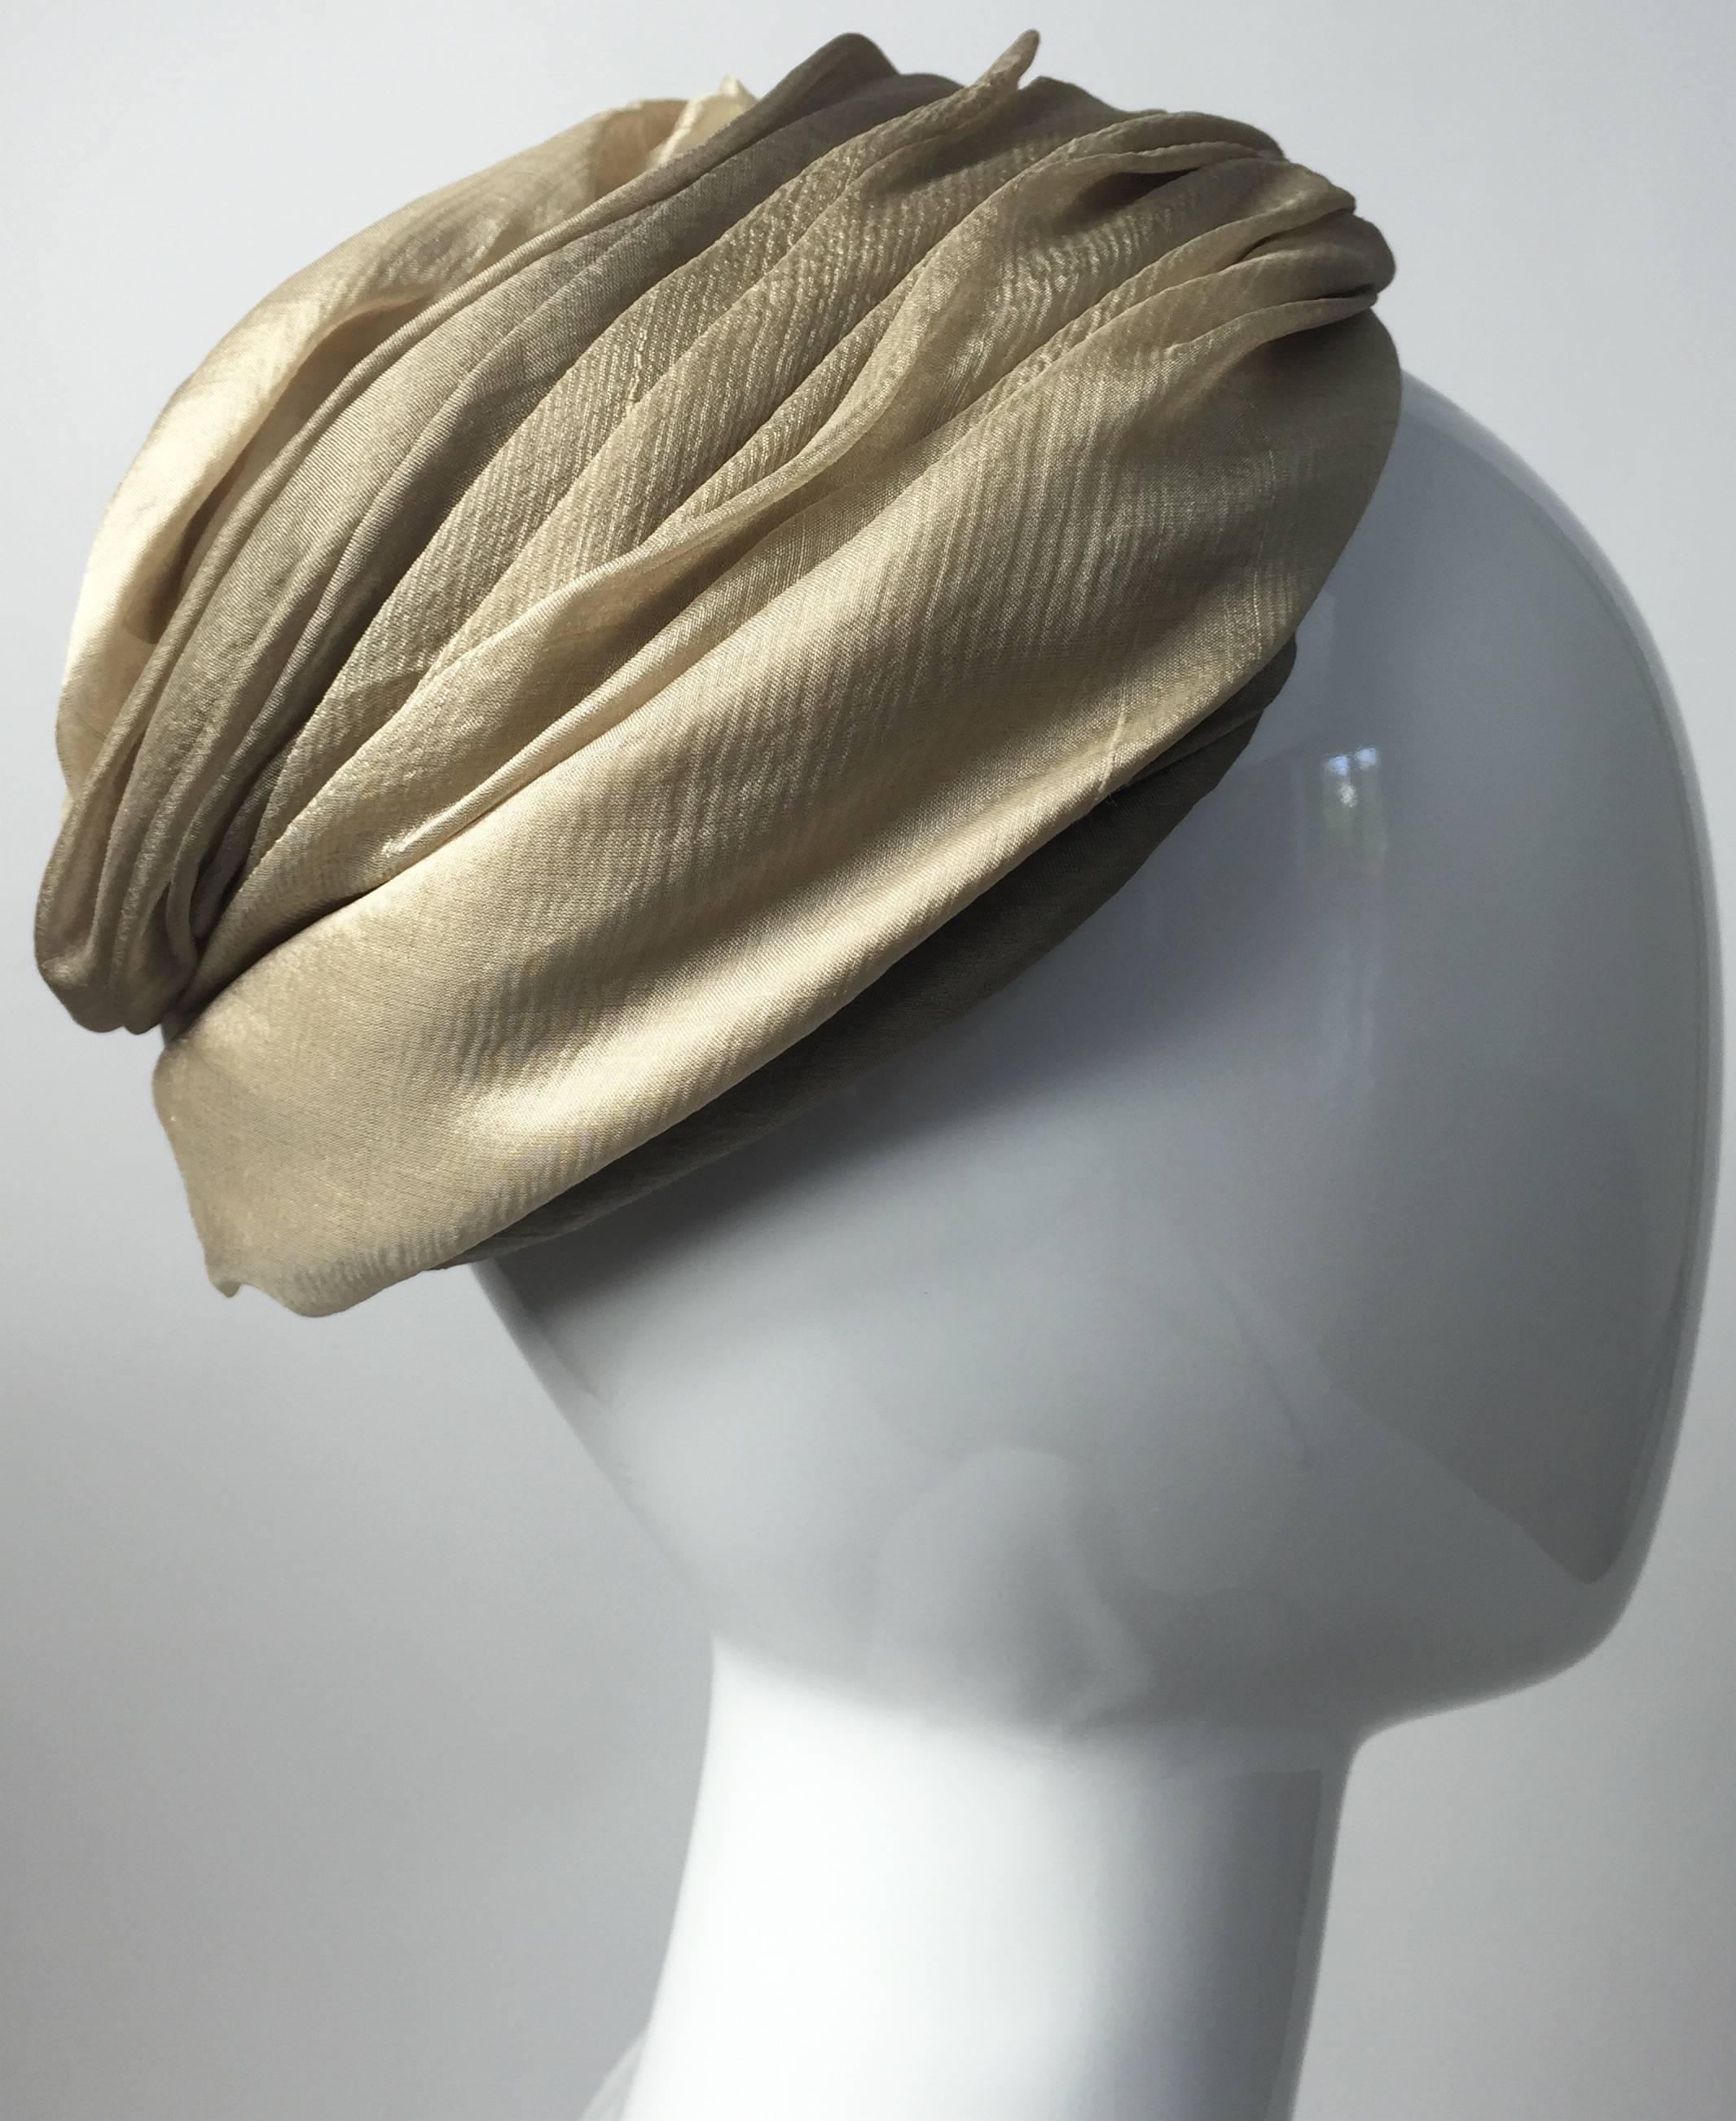 An exquisite early 1950s Christian Dior turban hat. Done in a soft silk chiffon in shades of taupe, beige and light golden ivory. The fabric is gently draped and pleated. Hand finished. Lined with a netting
In excellent condition
Measurements: 22